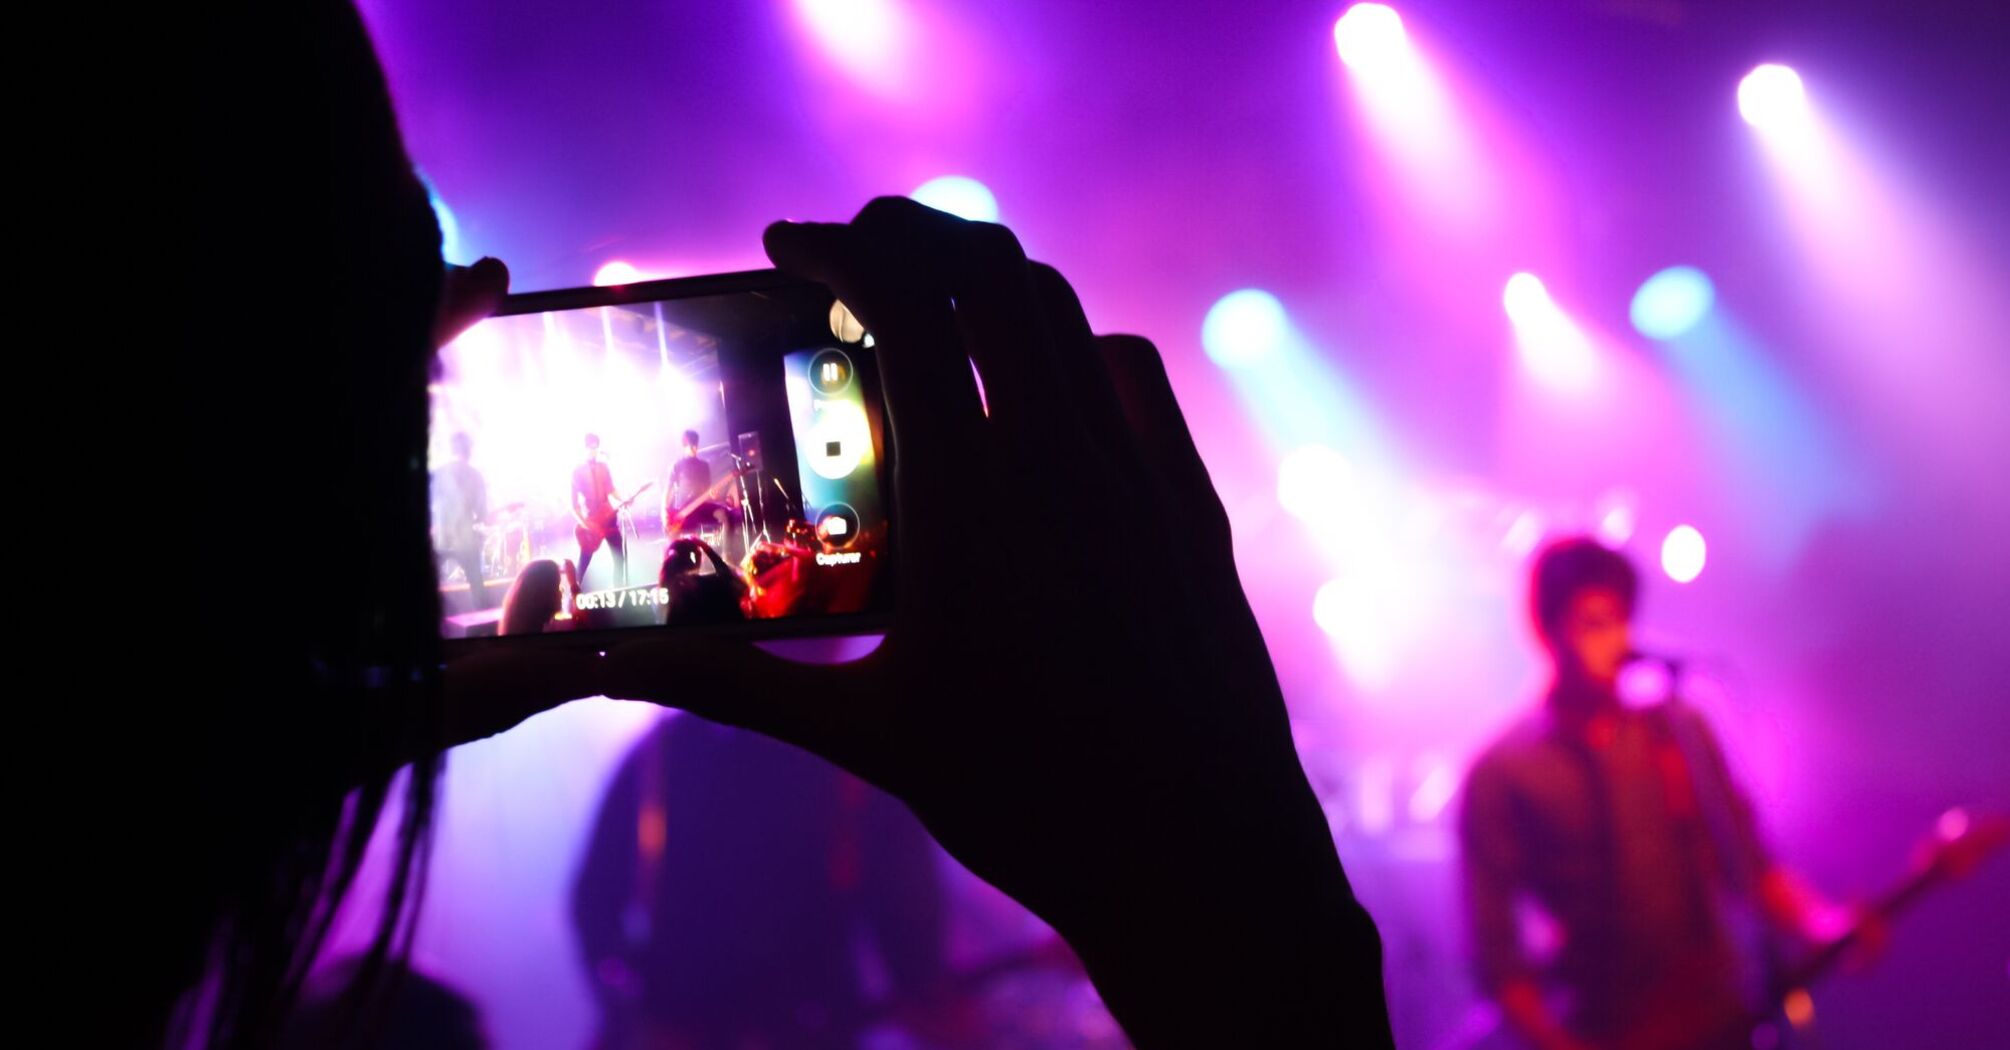 Mobile filming of a live concert